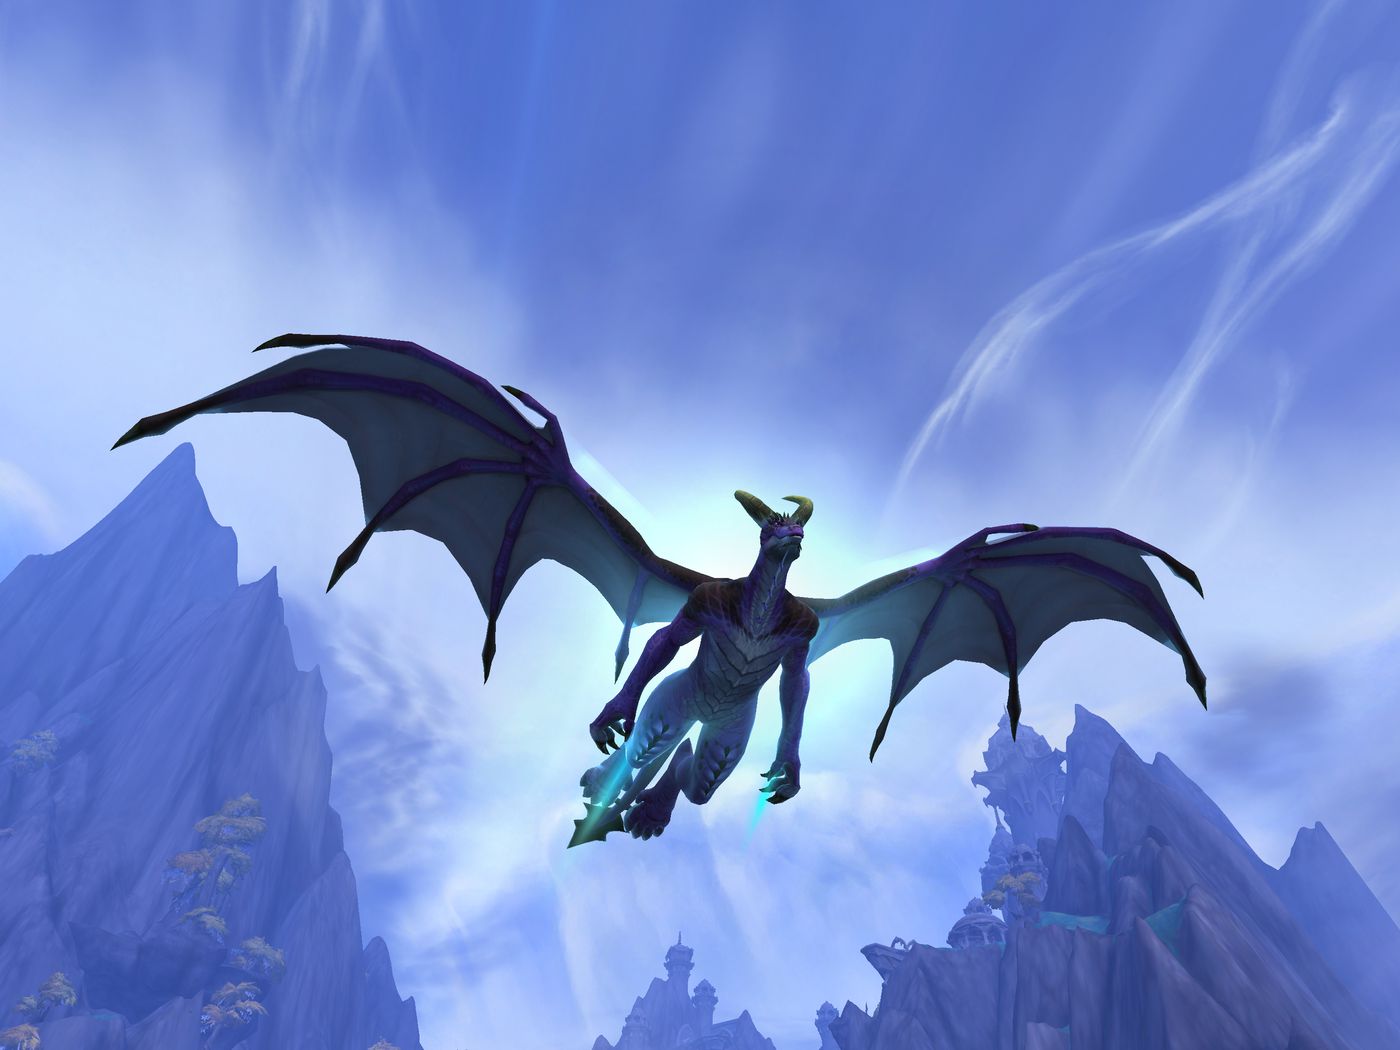 World of Warcraft's Dracthyr Evoker is fun, but something's missing